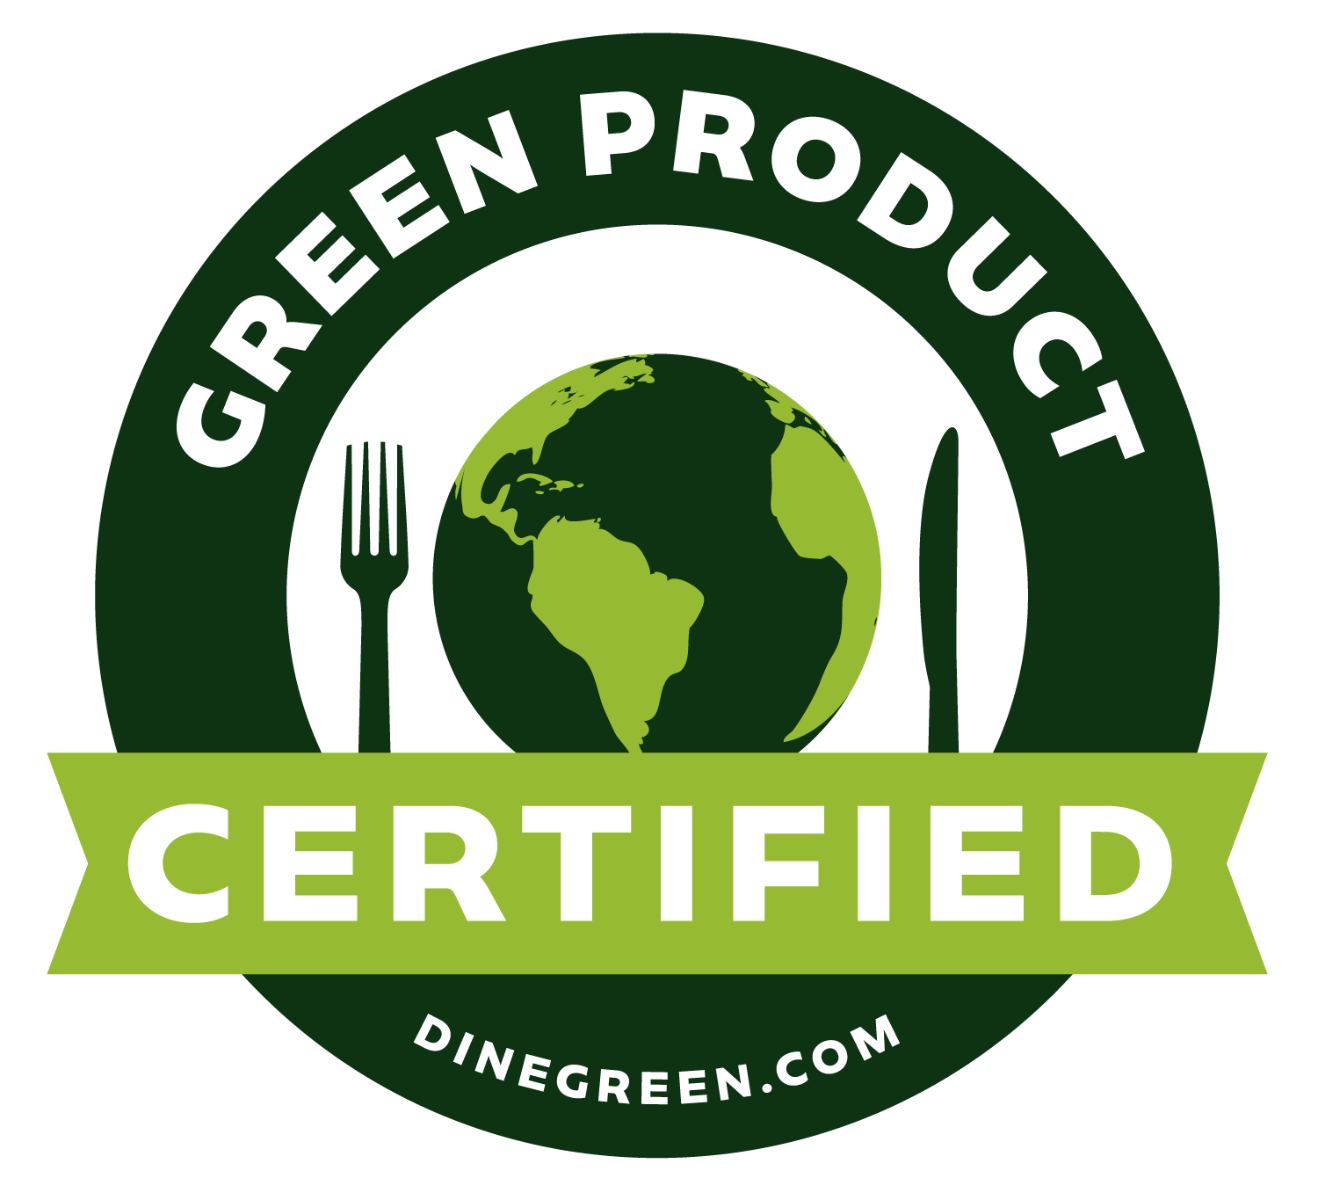 Green product certified